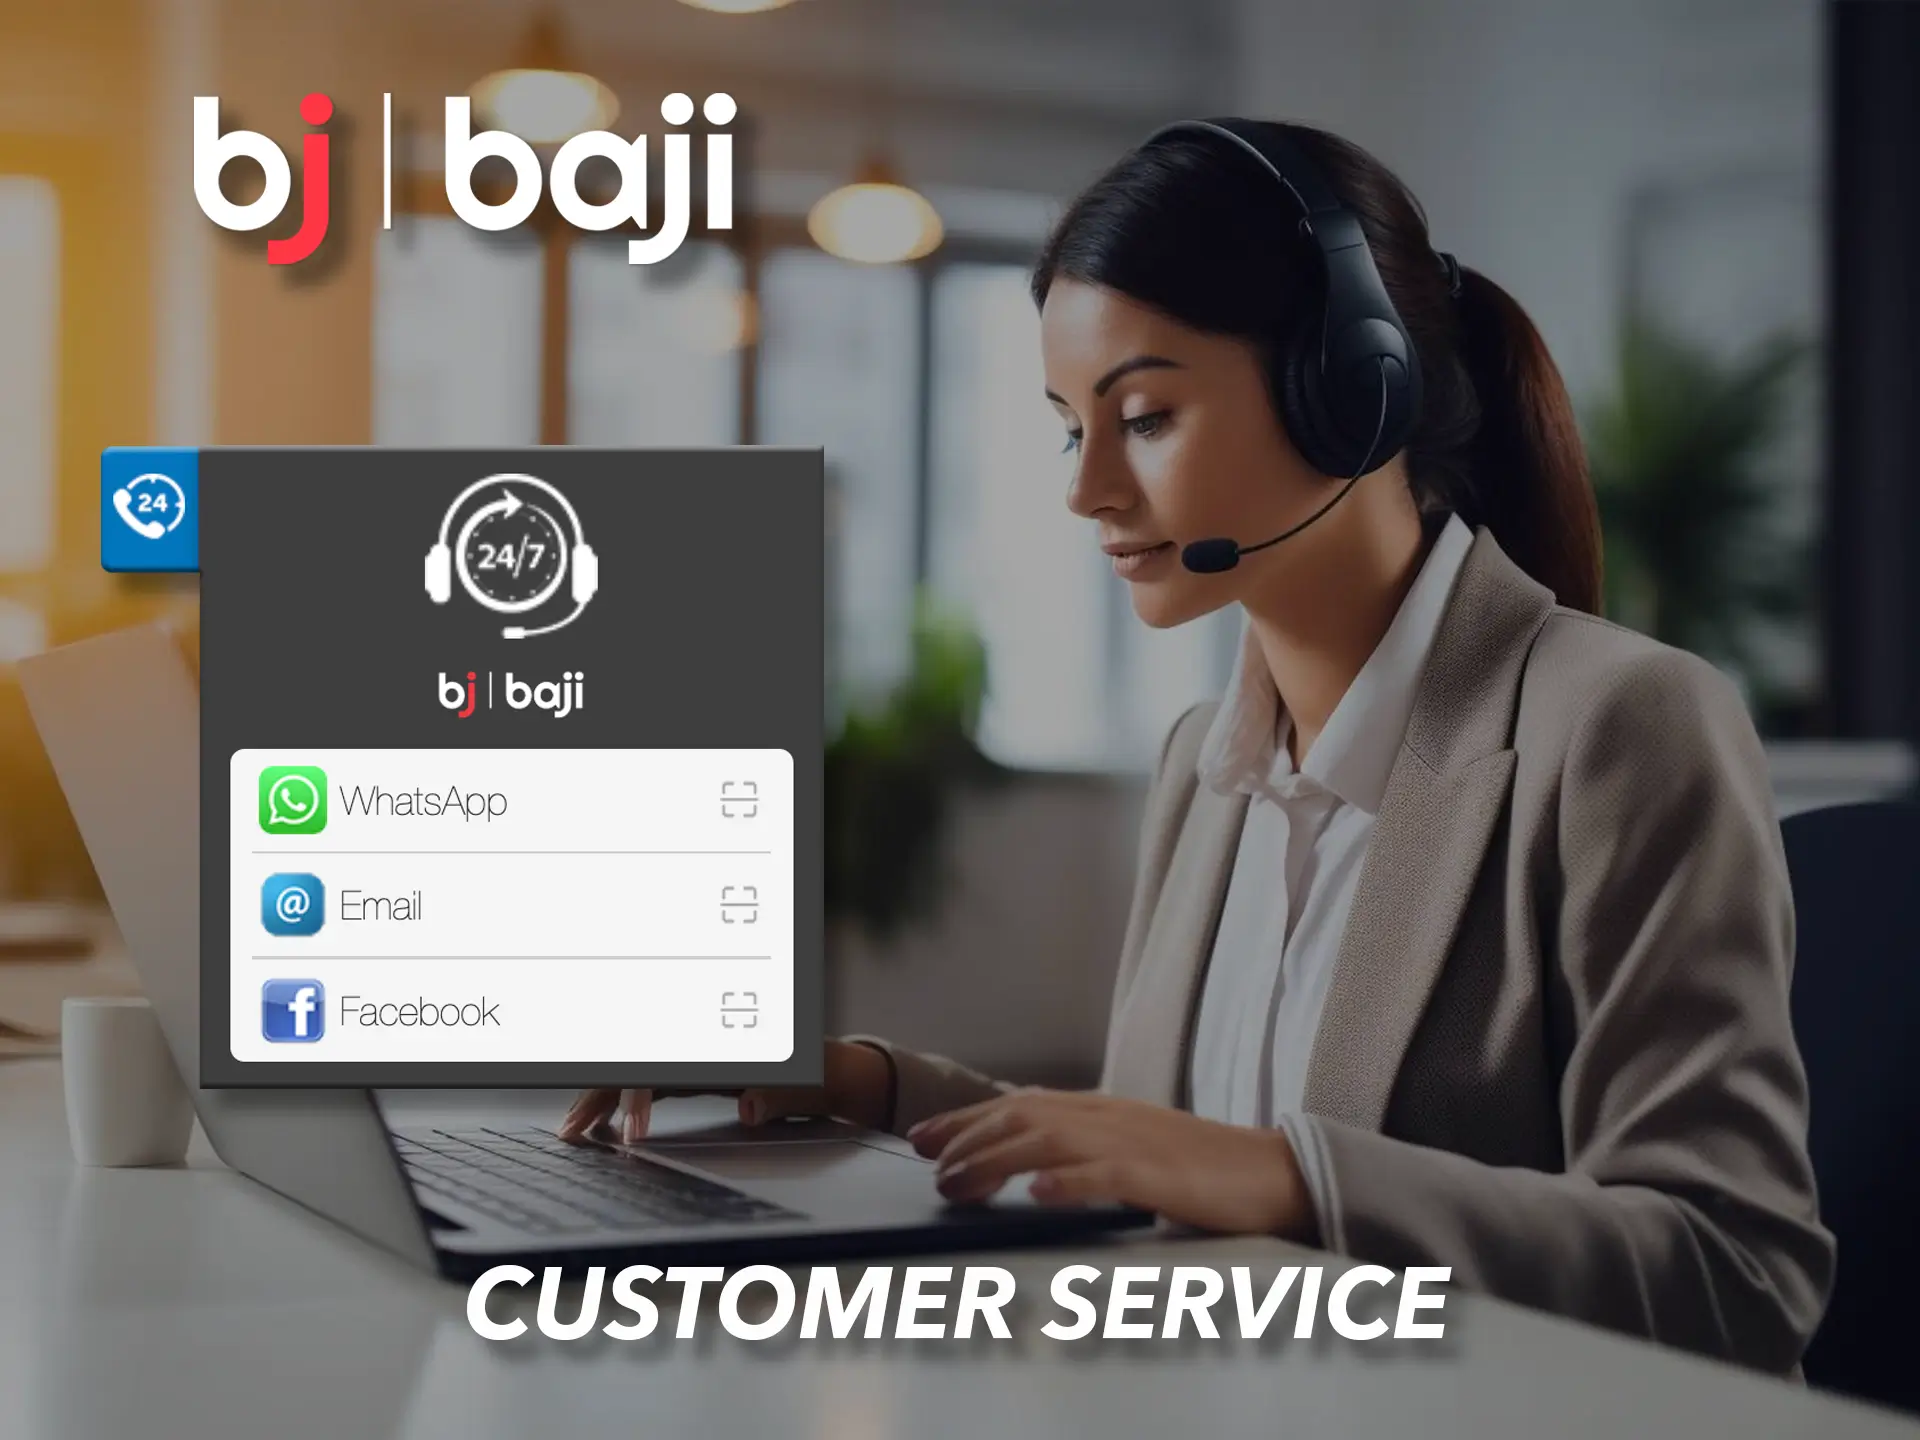 Contact Baji Customer Support for assistance with any questions you may have.